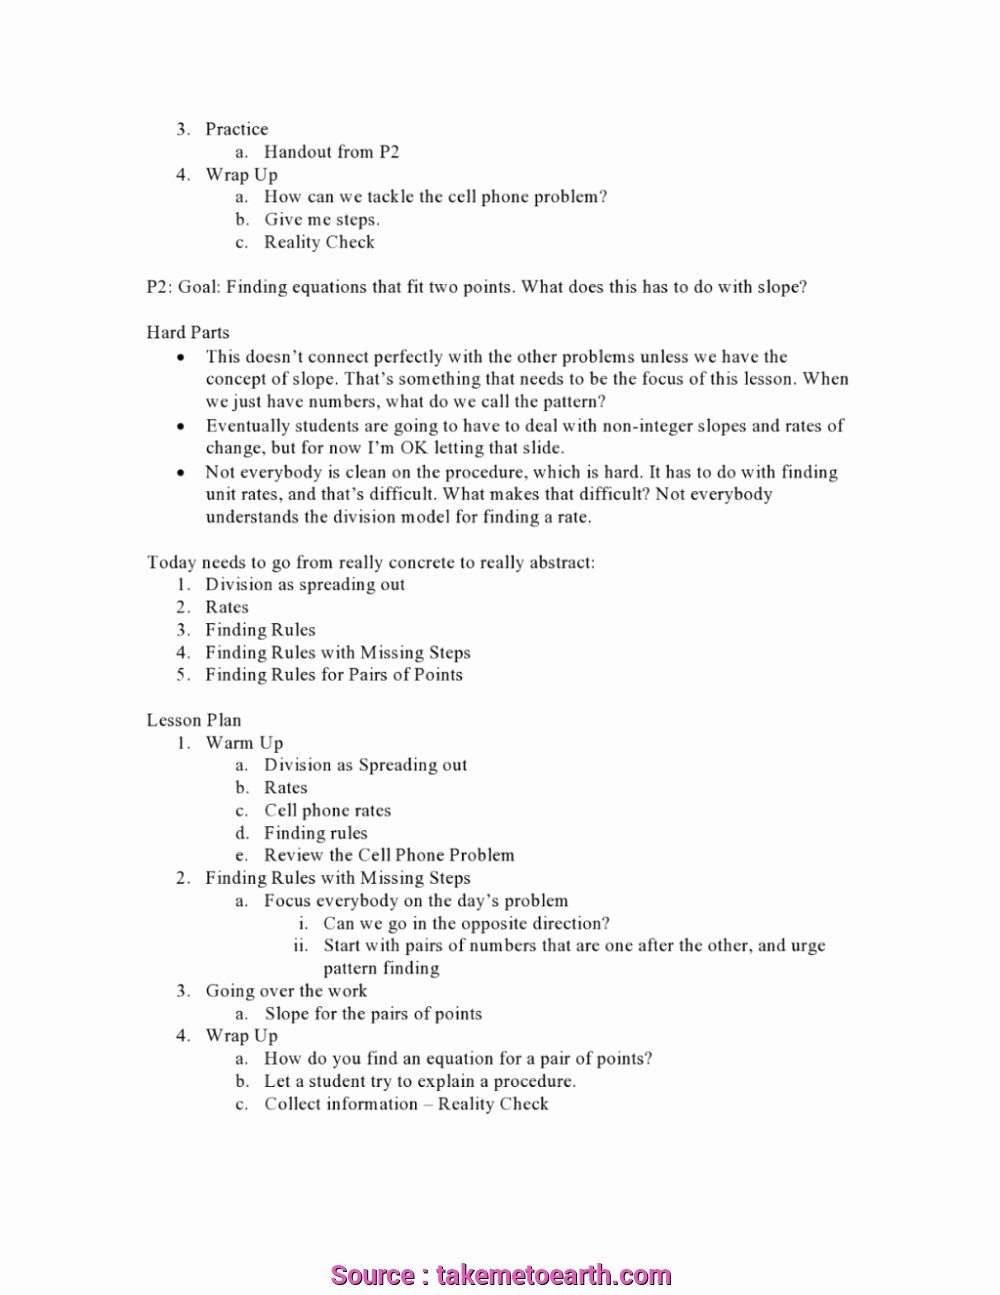 Elementary Math Lesson Plan Template Unique 5 top How to Do A Lesson Plan Elementary School Ideas